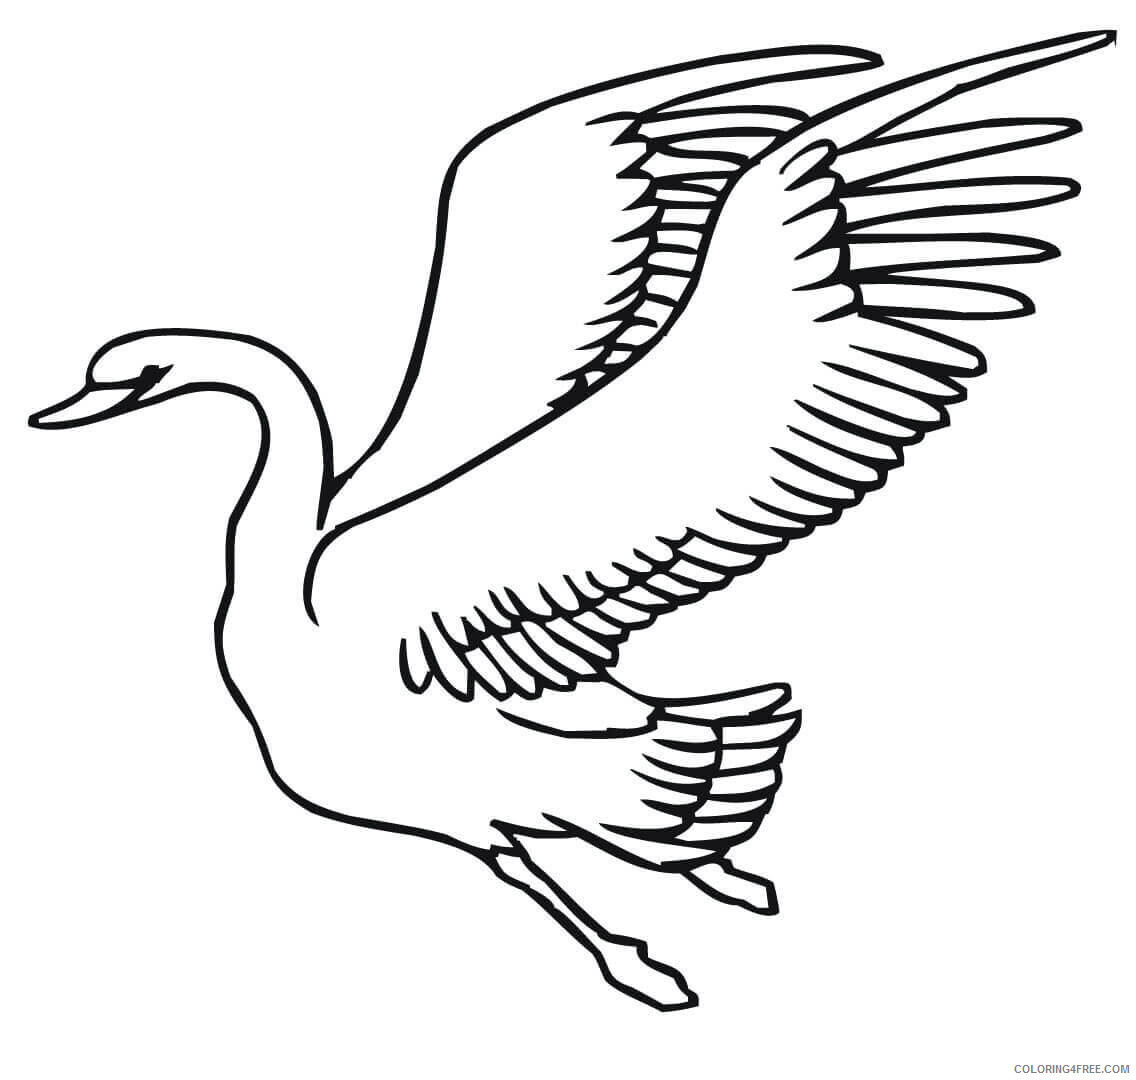 Swans Coloring Pages Animal Printable Sheets Swan Flying 2021 4740 Coloring4free